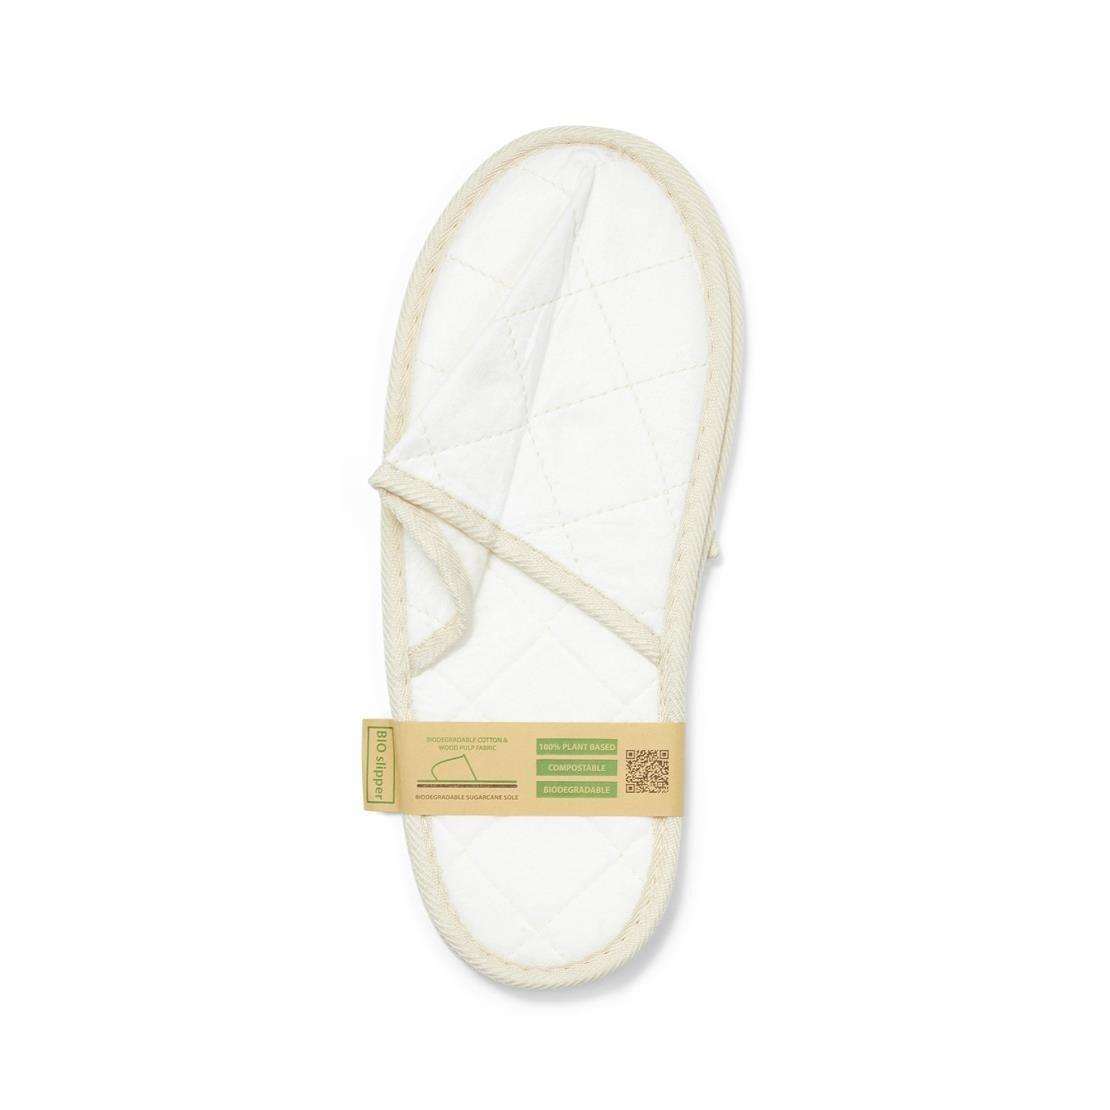 pair of eco friendly spa slippers